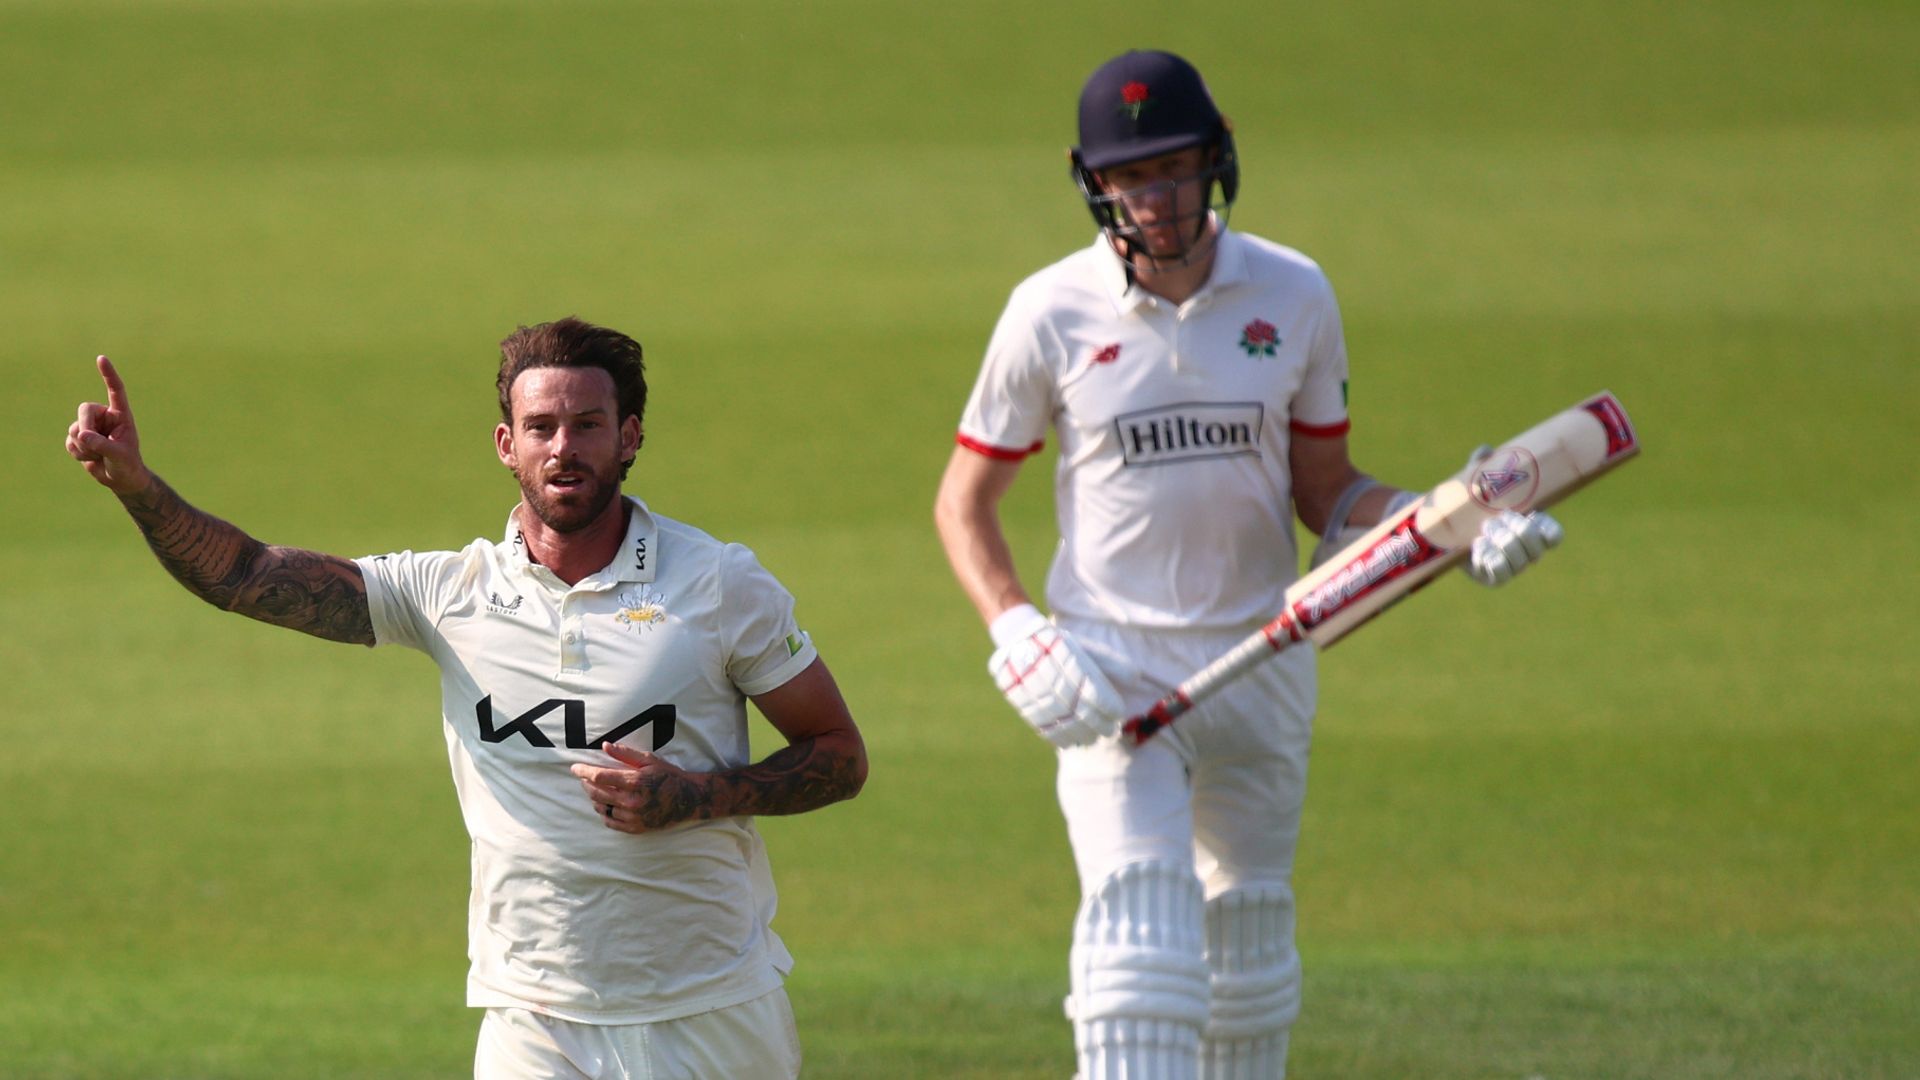 Lancashire bounce back against leaders Surrey as Essex take control